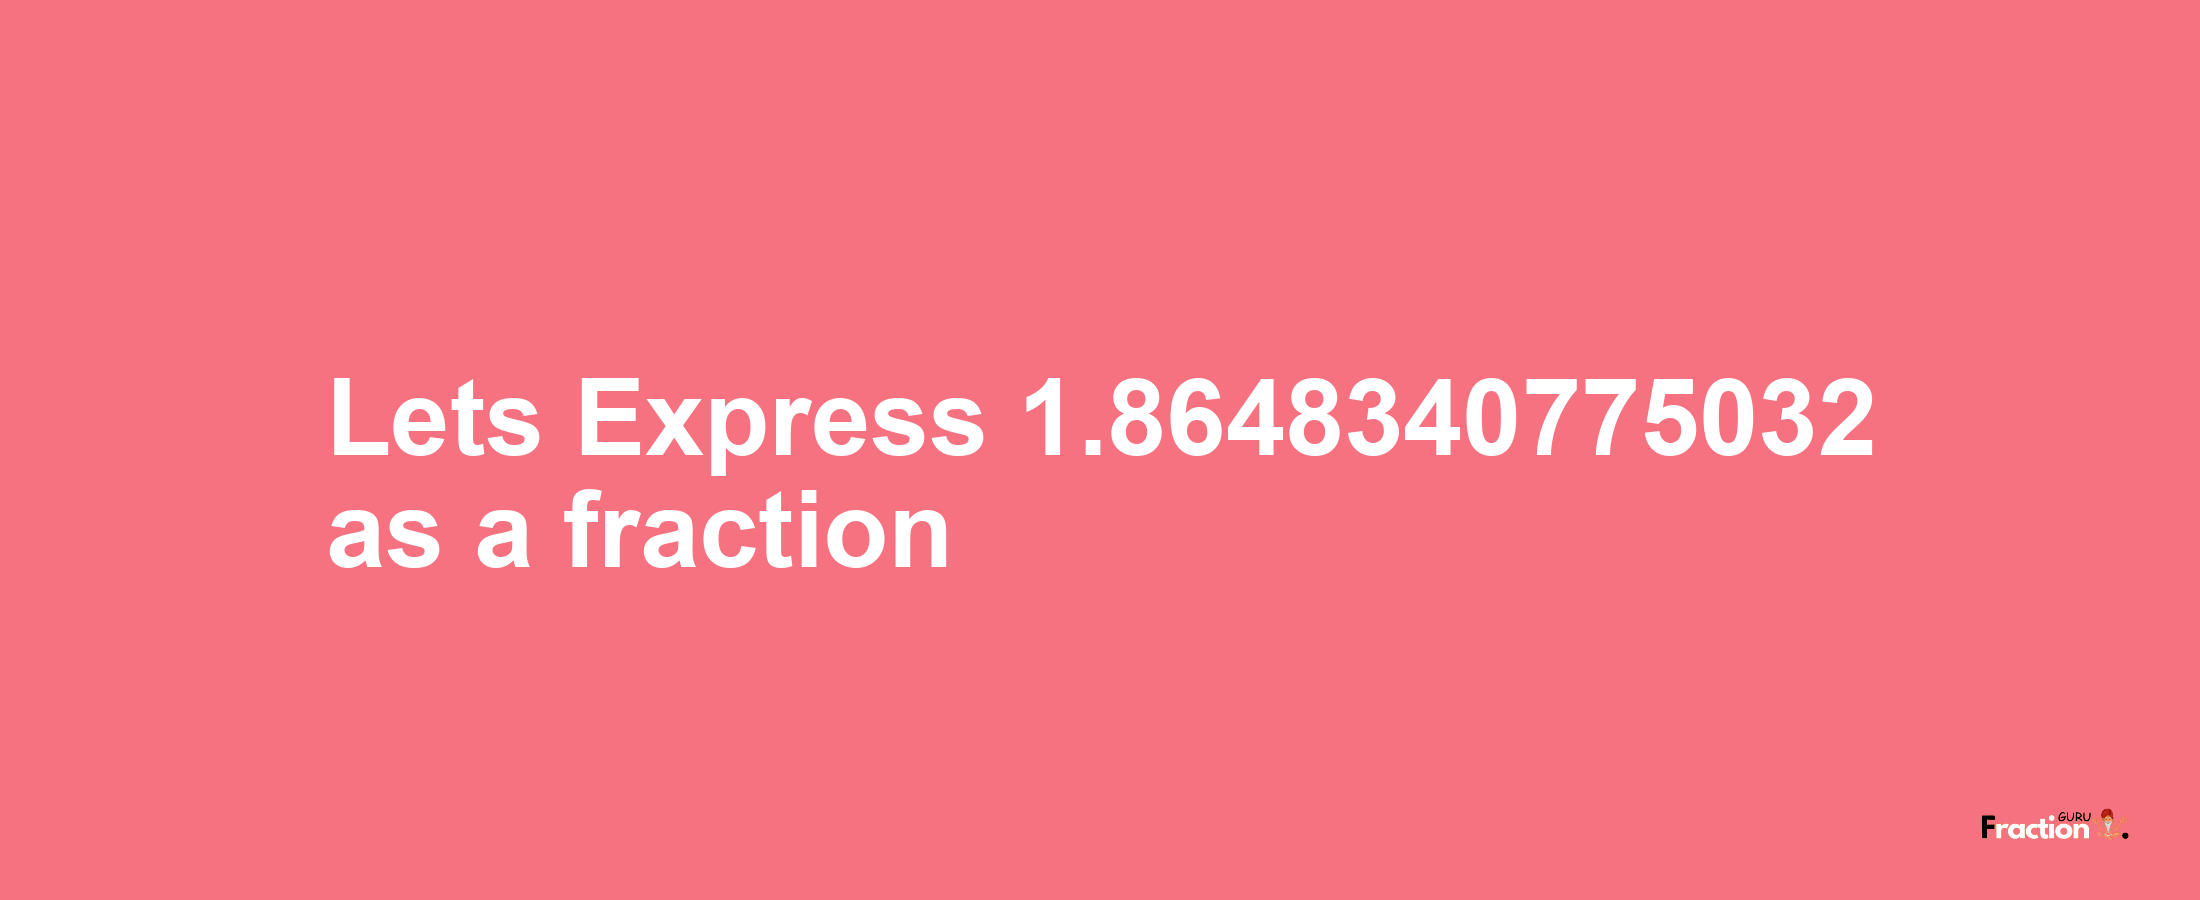 Lets Express 1.8648340775032 as afraction